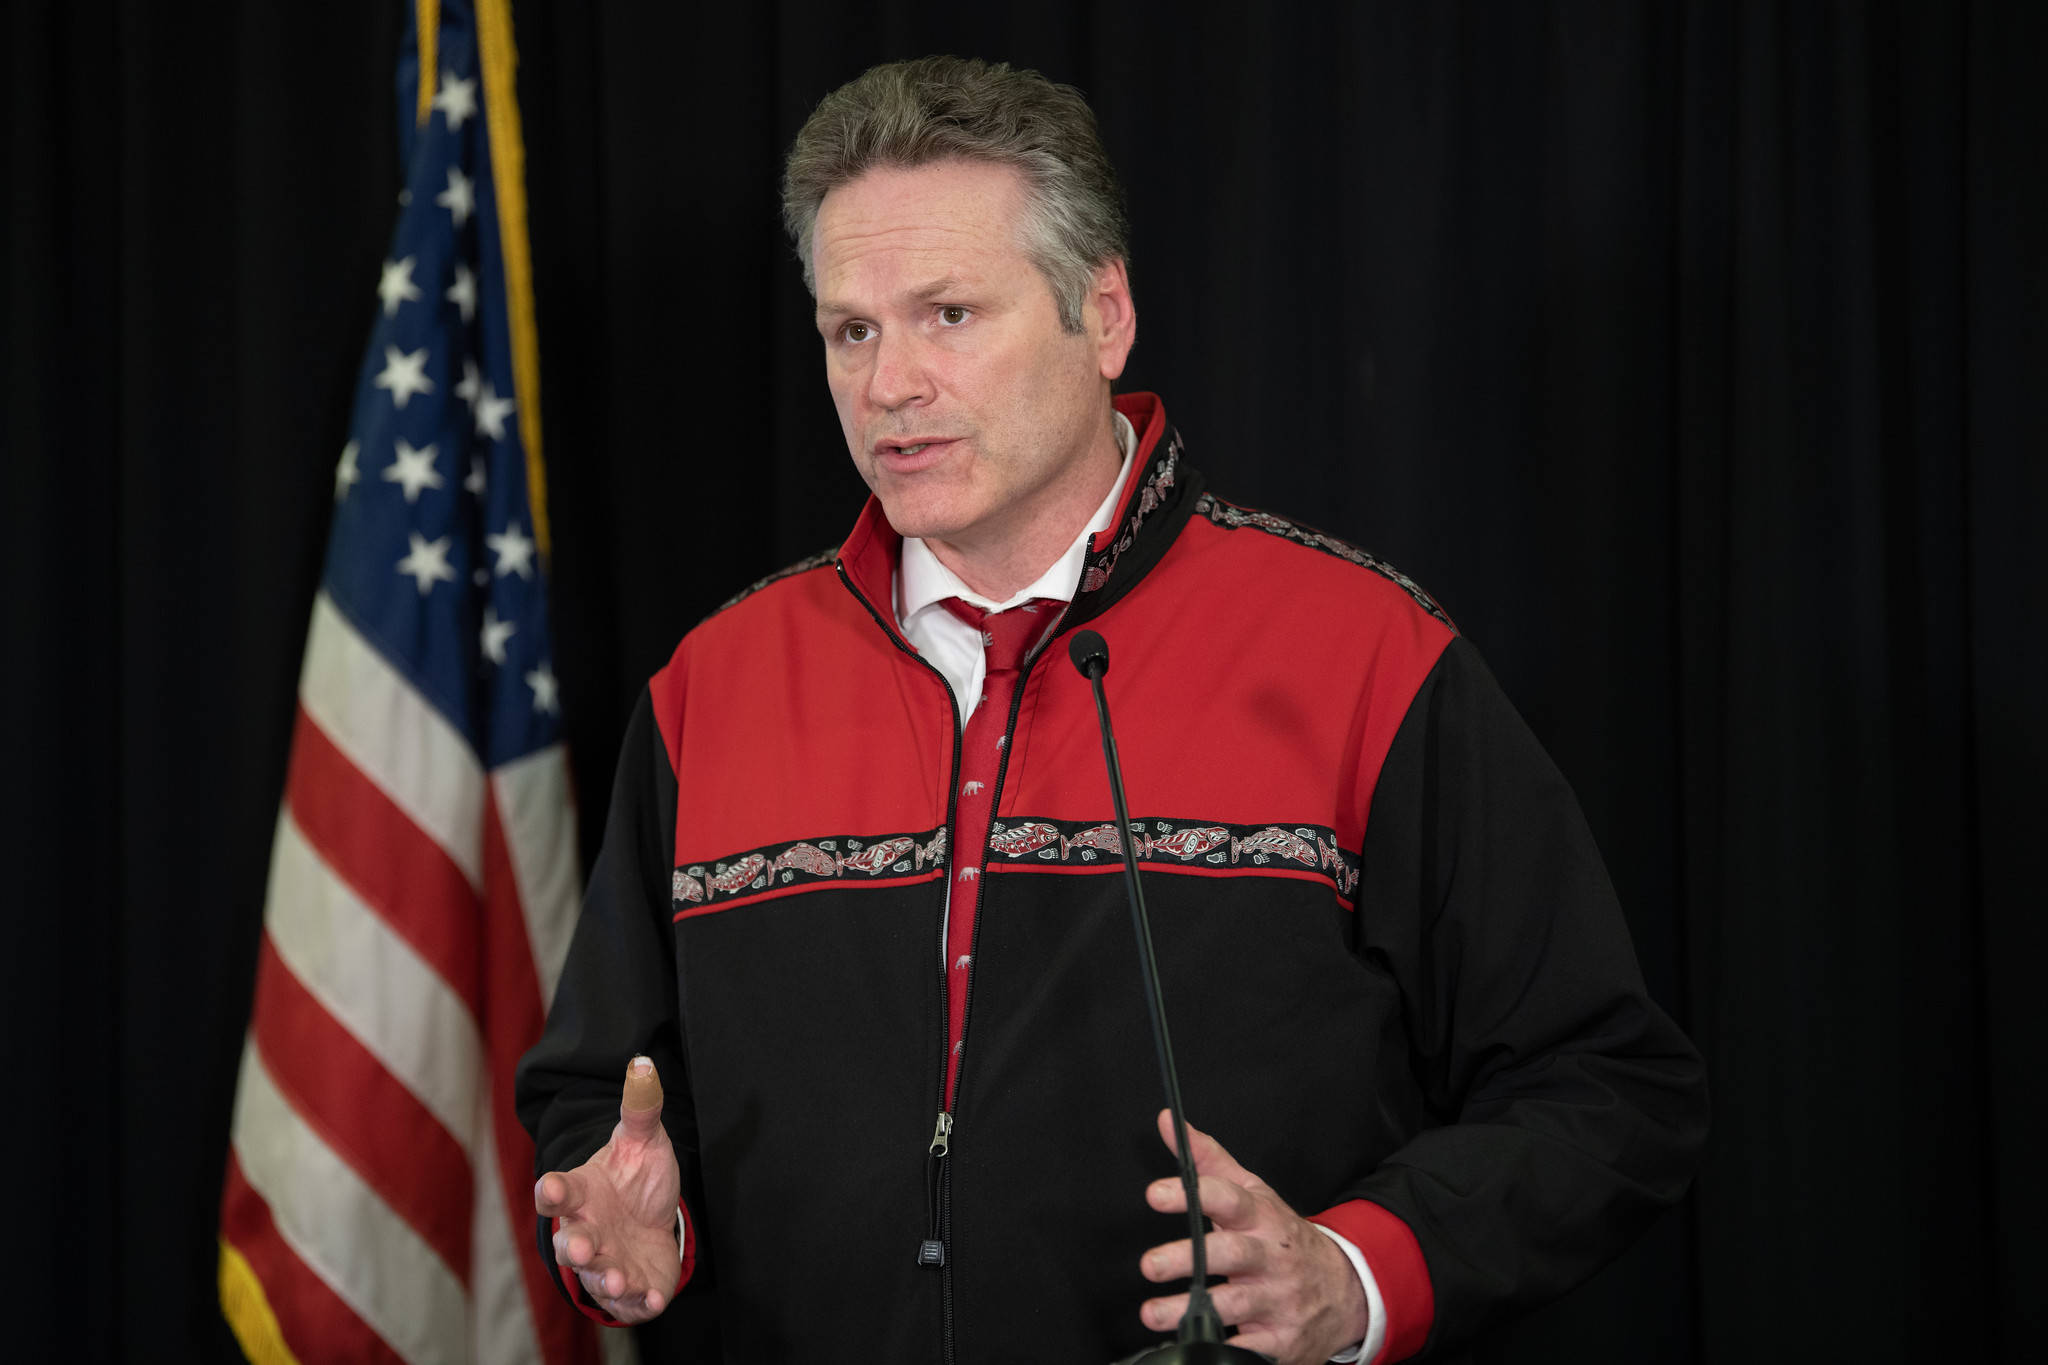 Gov. Mike Dunleavy speaks at a press conference in Anchorage on Tuesday, April 14, 2020. (Courtesy photo | Office of Gov. Mike Dunleavy)